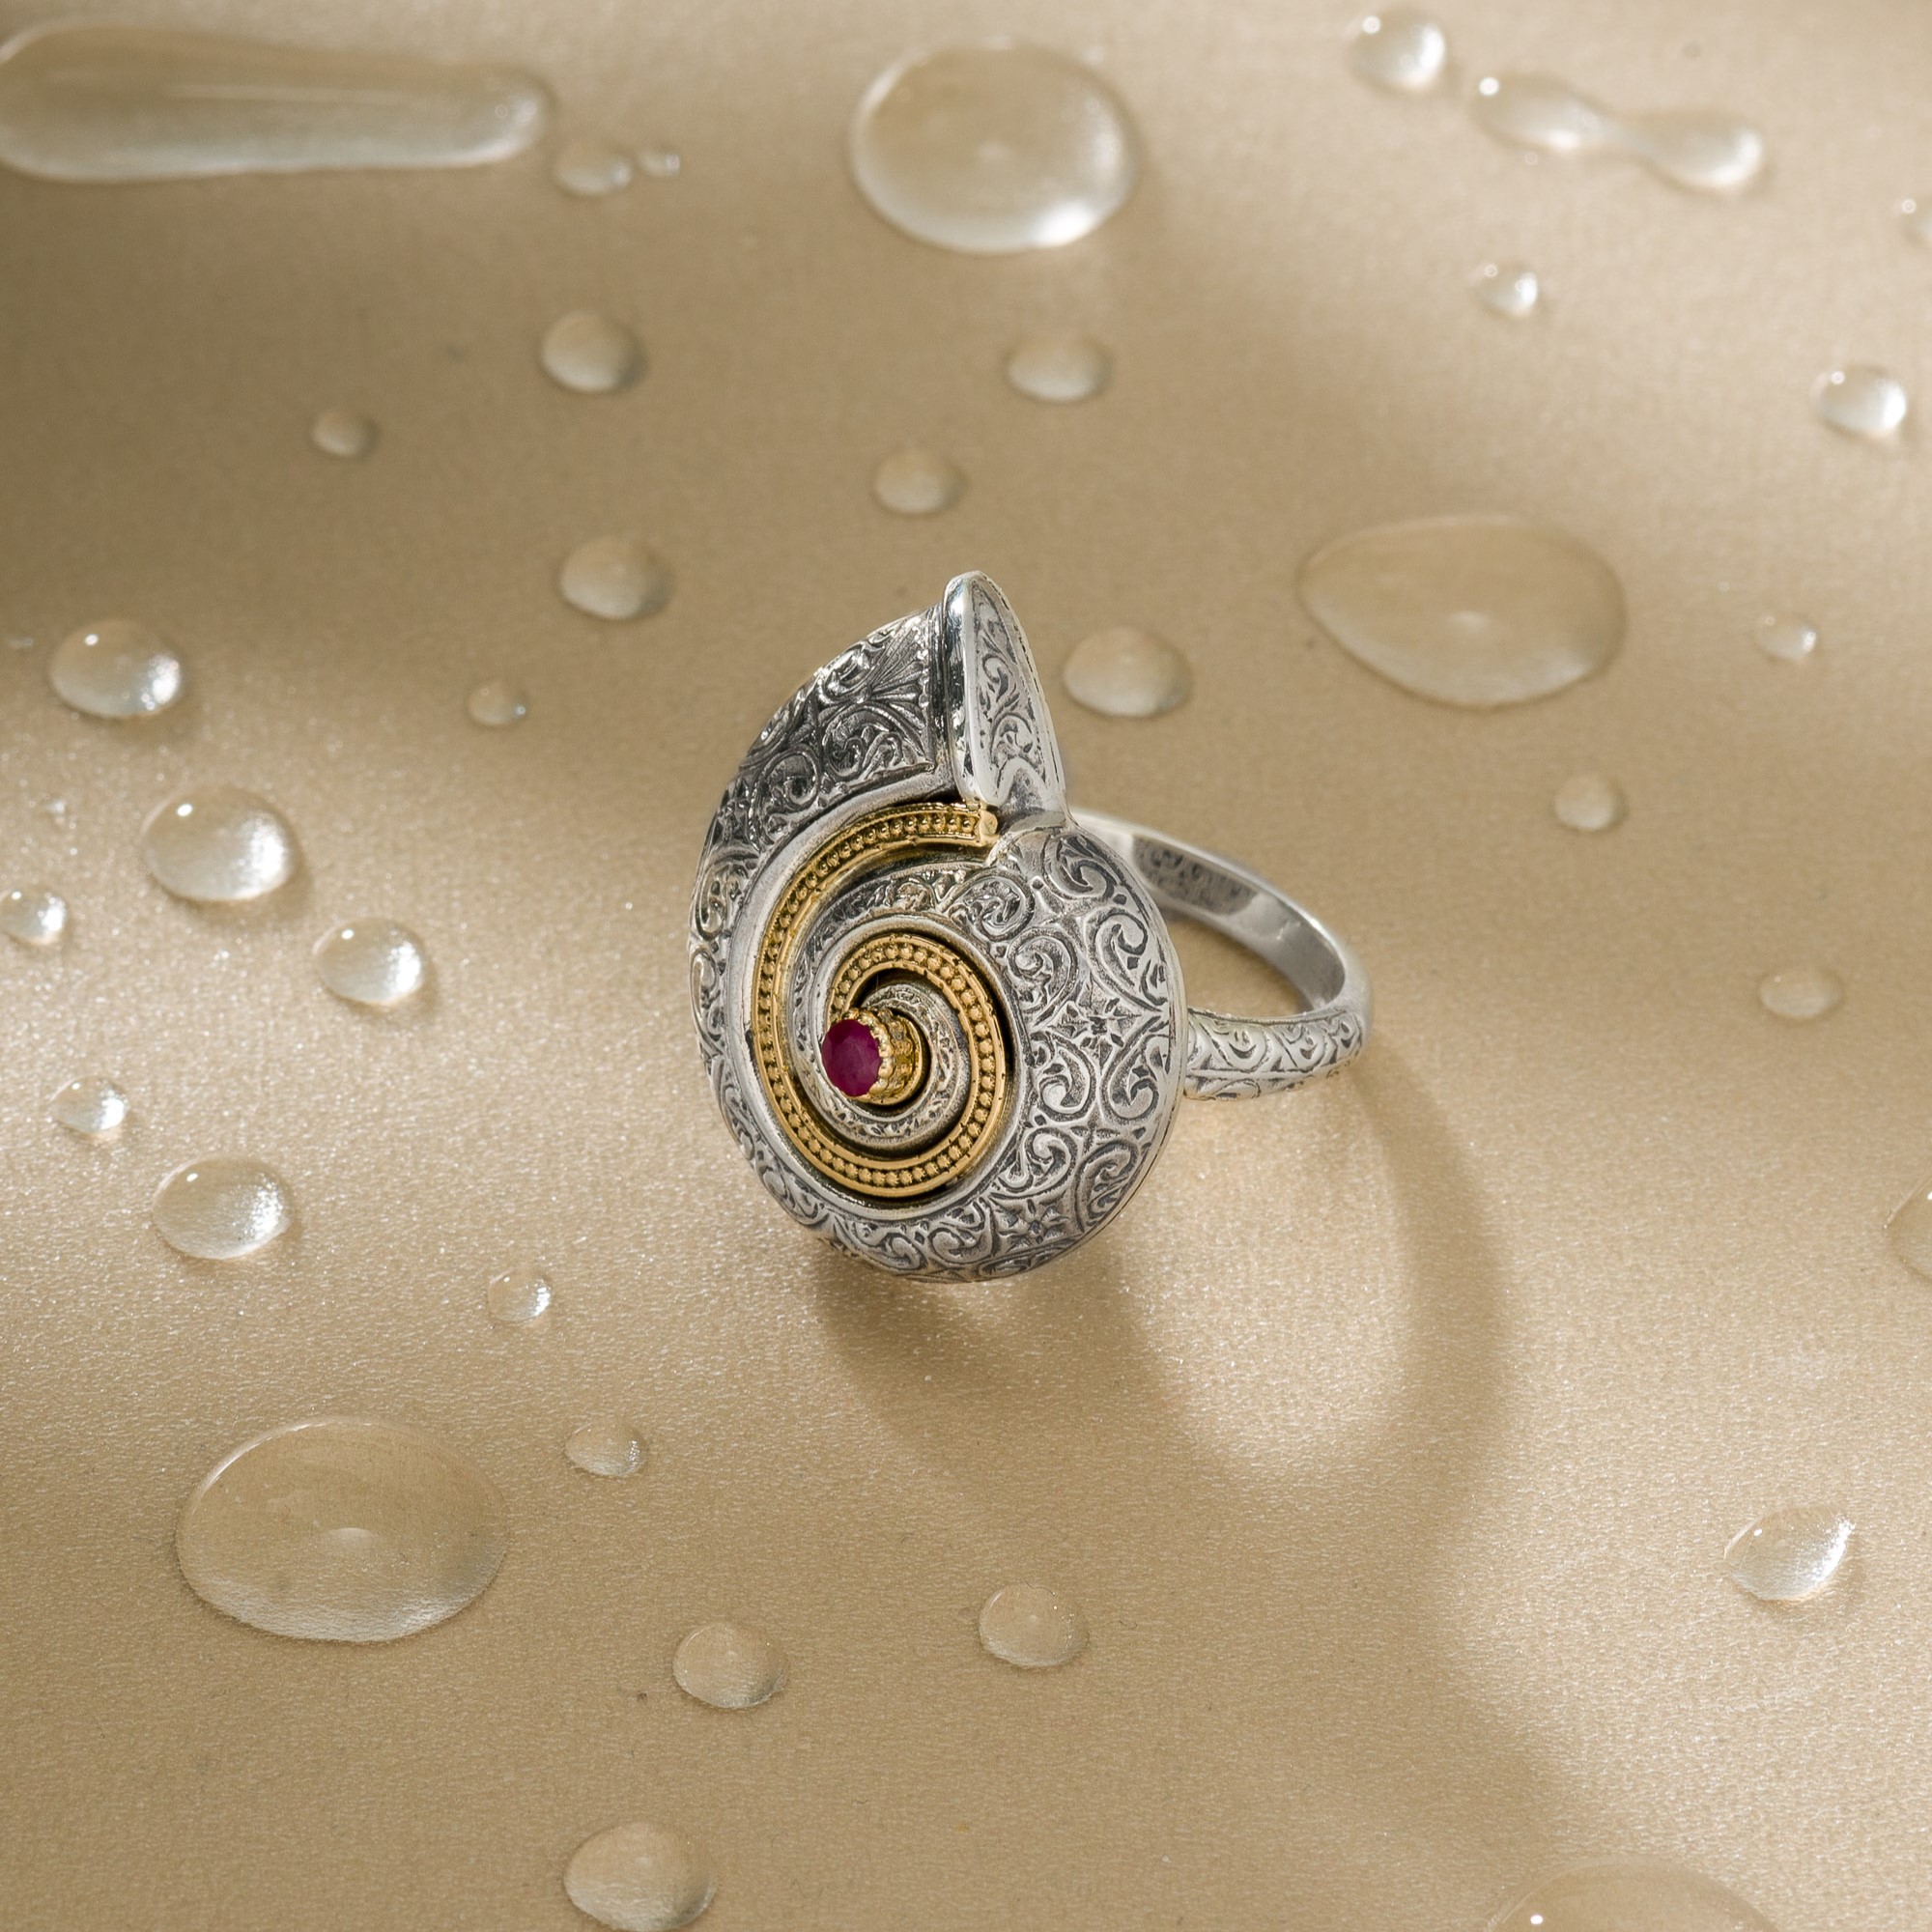 Sea Snail Ring in 18K Gold and Sterling Silver with Ruby